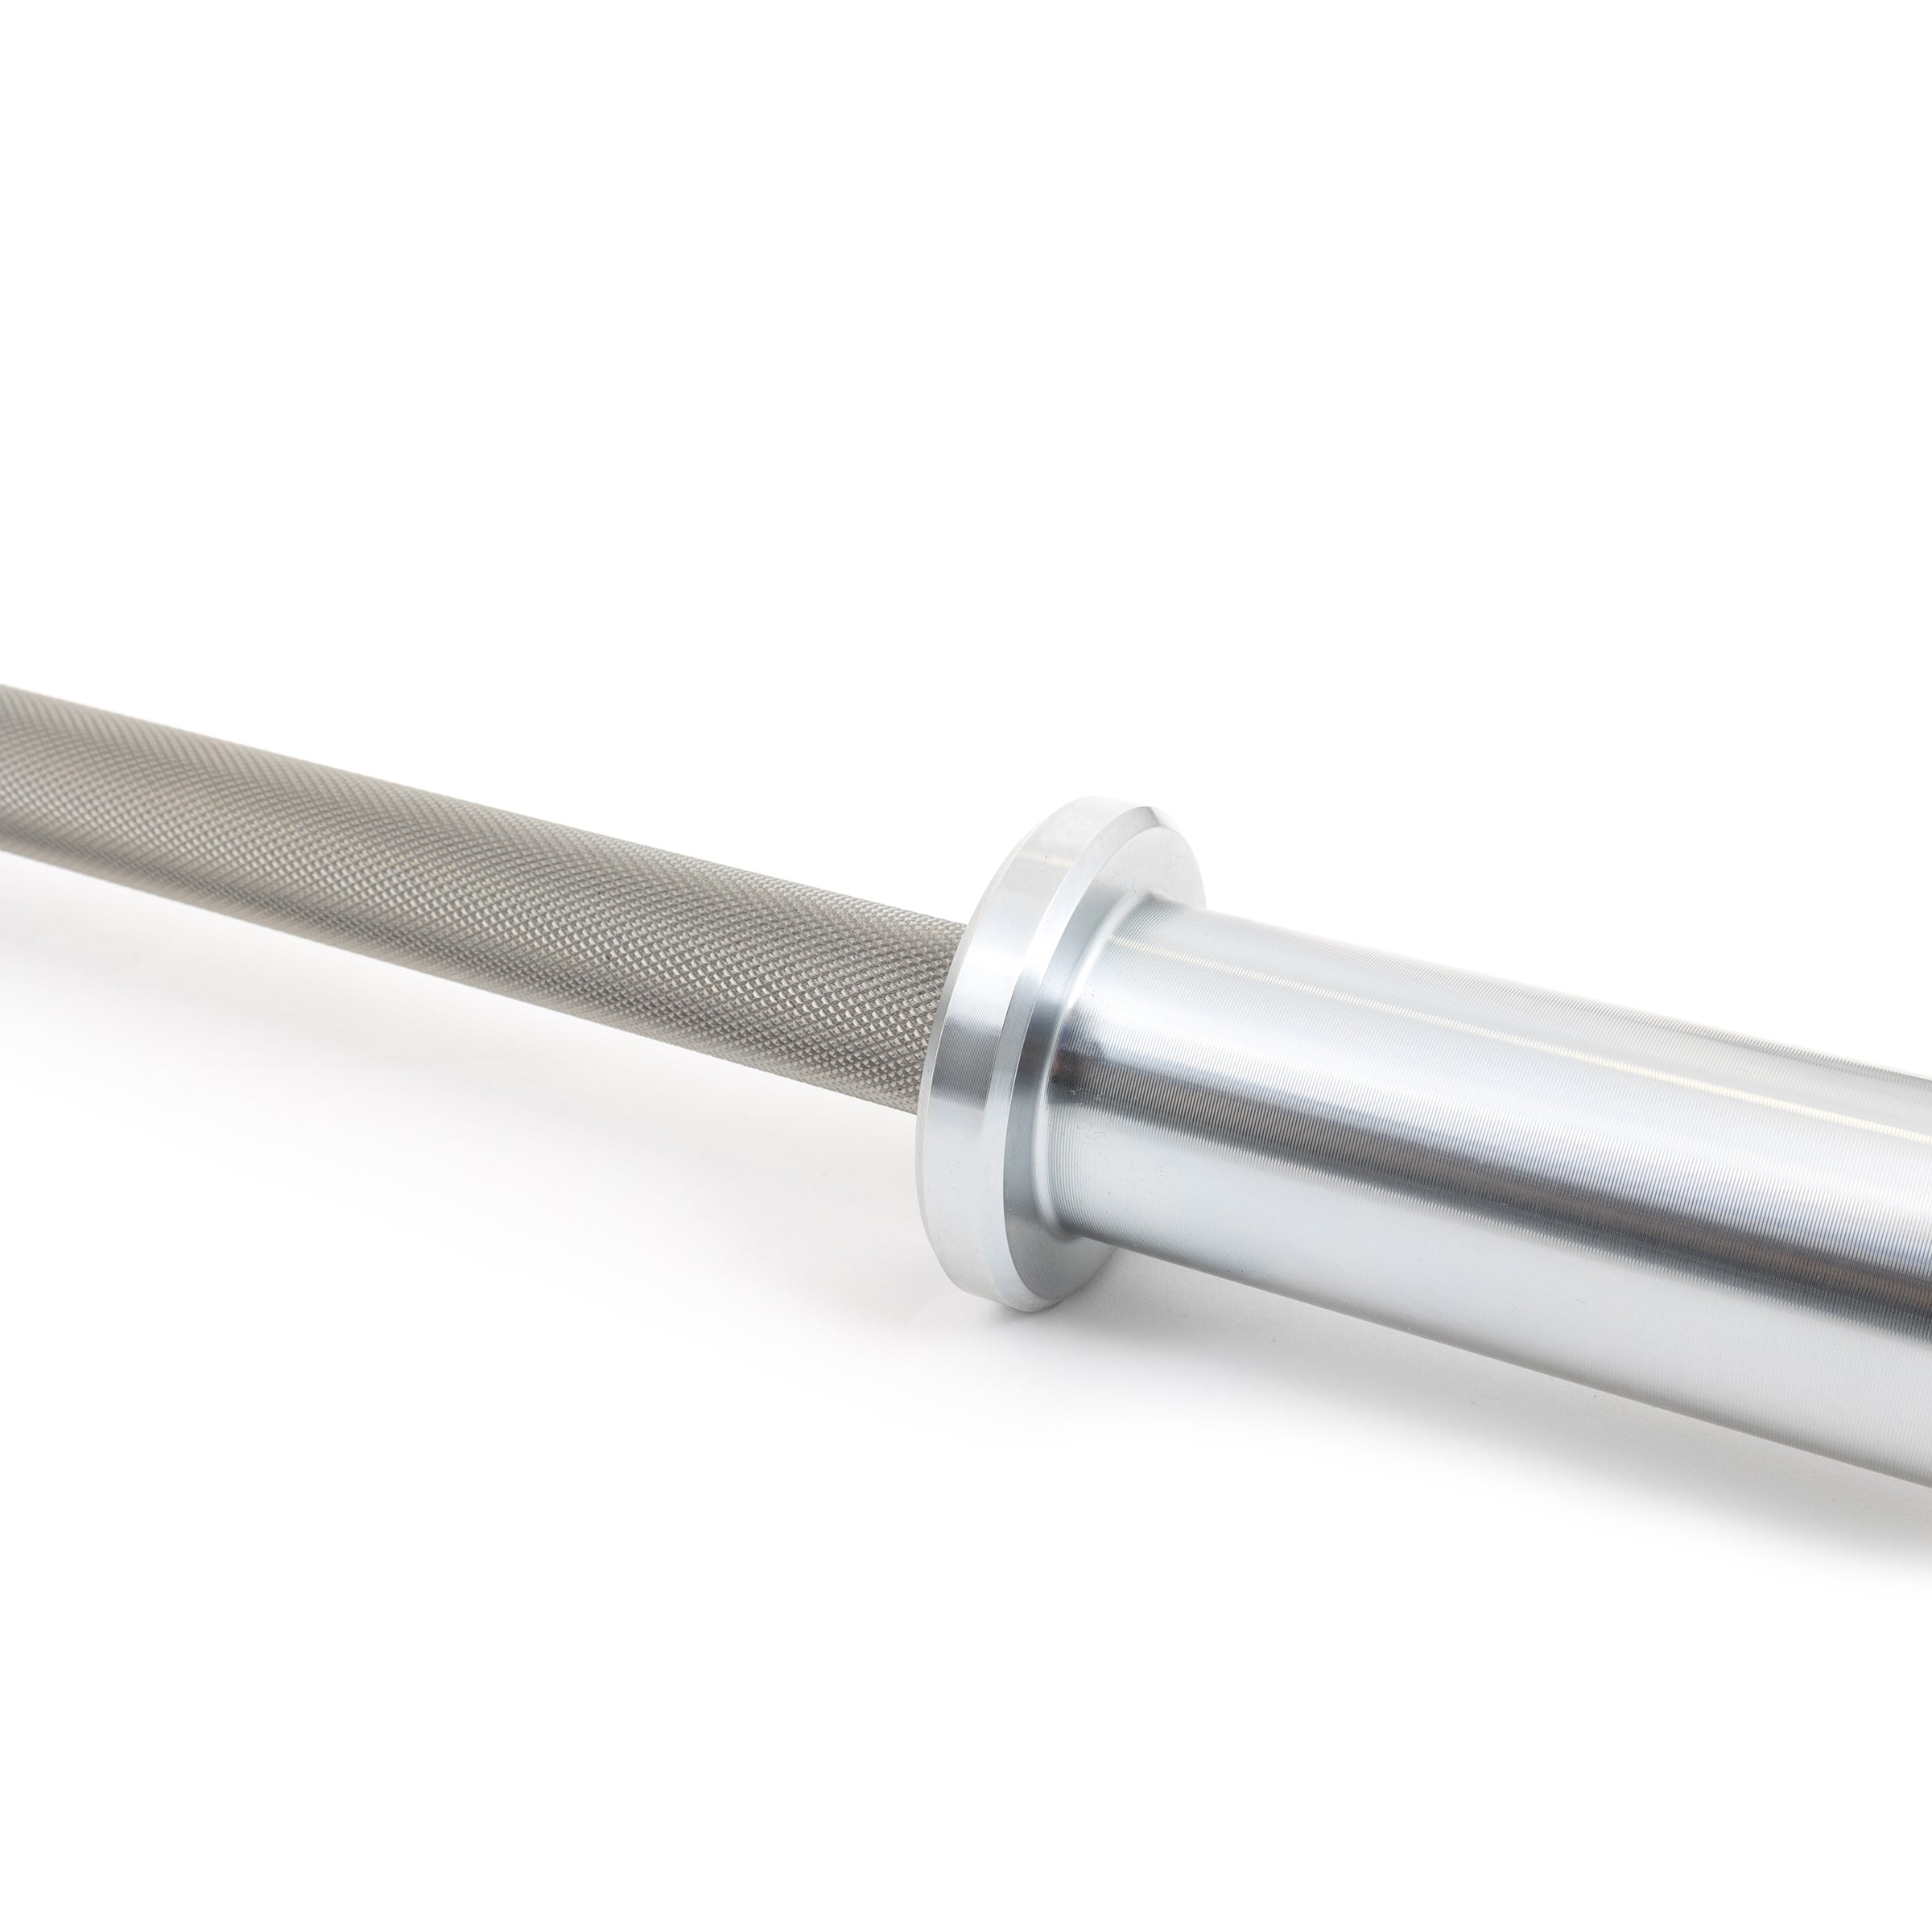 Wolverson Stainless Steel Power Bar